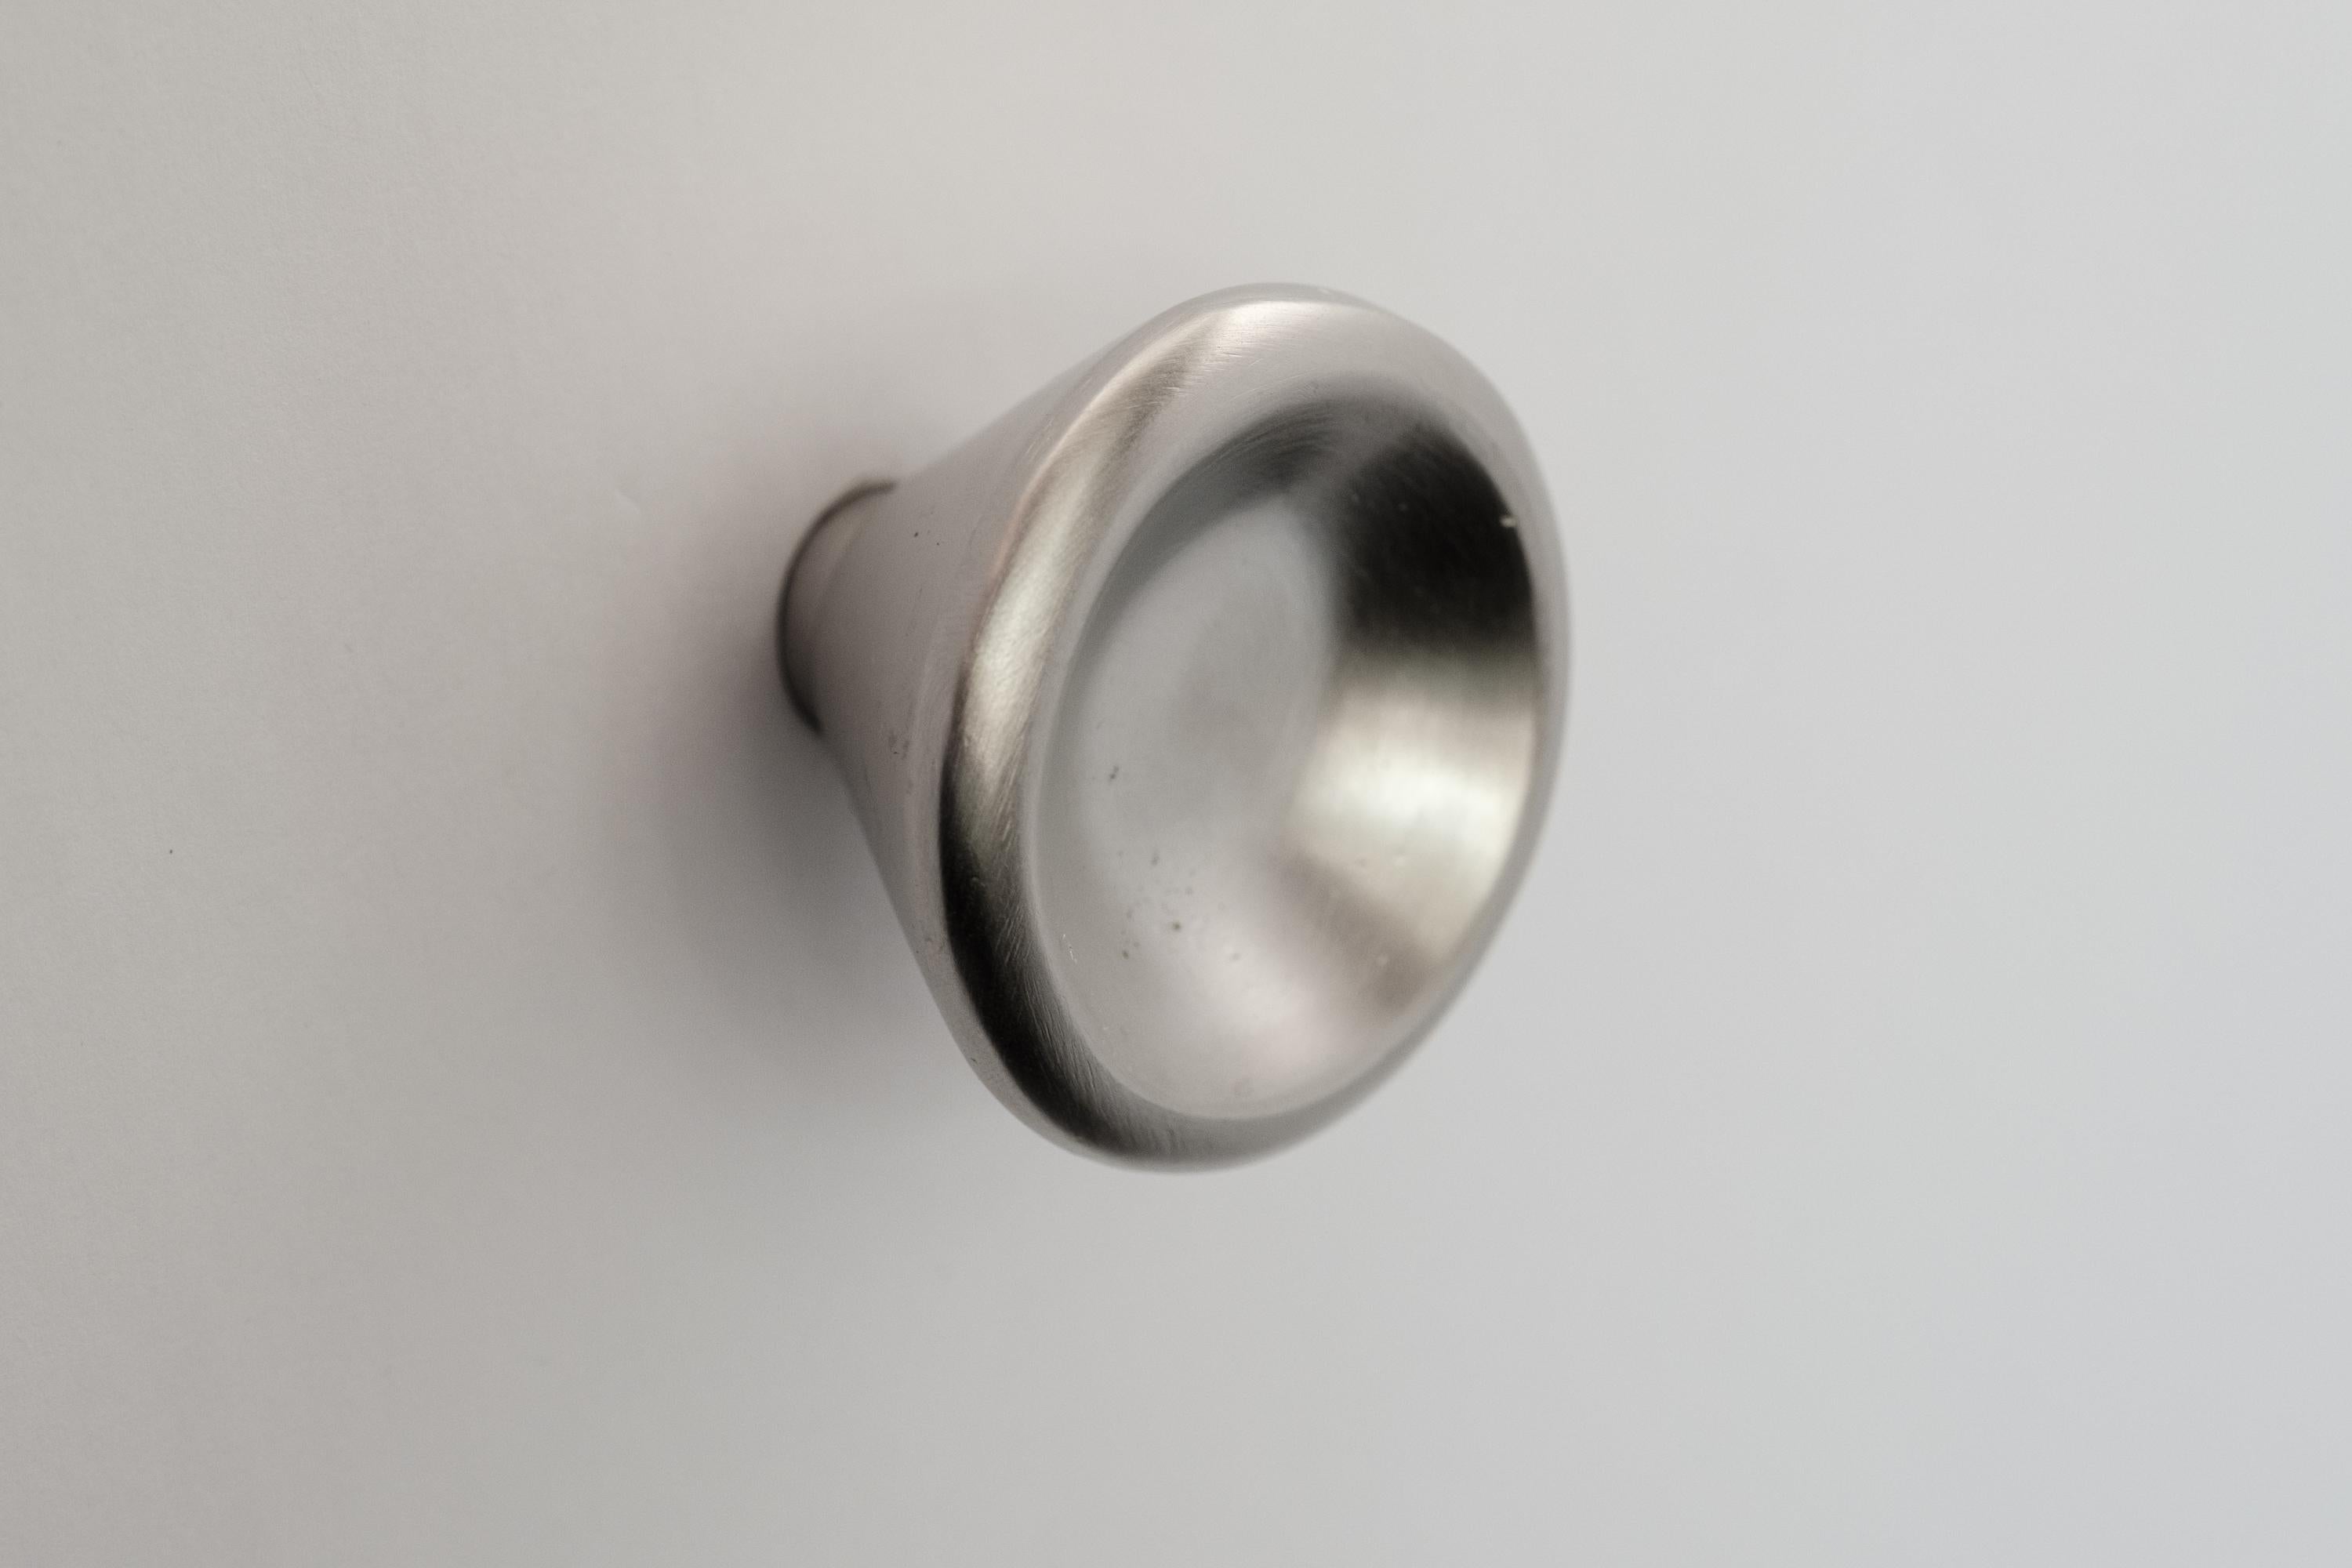 Carl Auböck Model #8040-1 Knob in Nickel.

Designed in the 1950s, this versatile and Minimalist Viennese knob is executed in brushed nickel by Werkstätte Carl Auböck, Austria. Its minimalist design combines clean form with functionality.

Produced